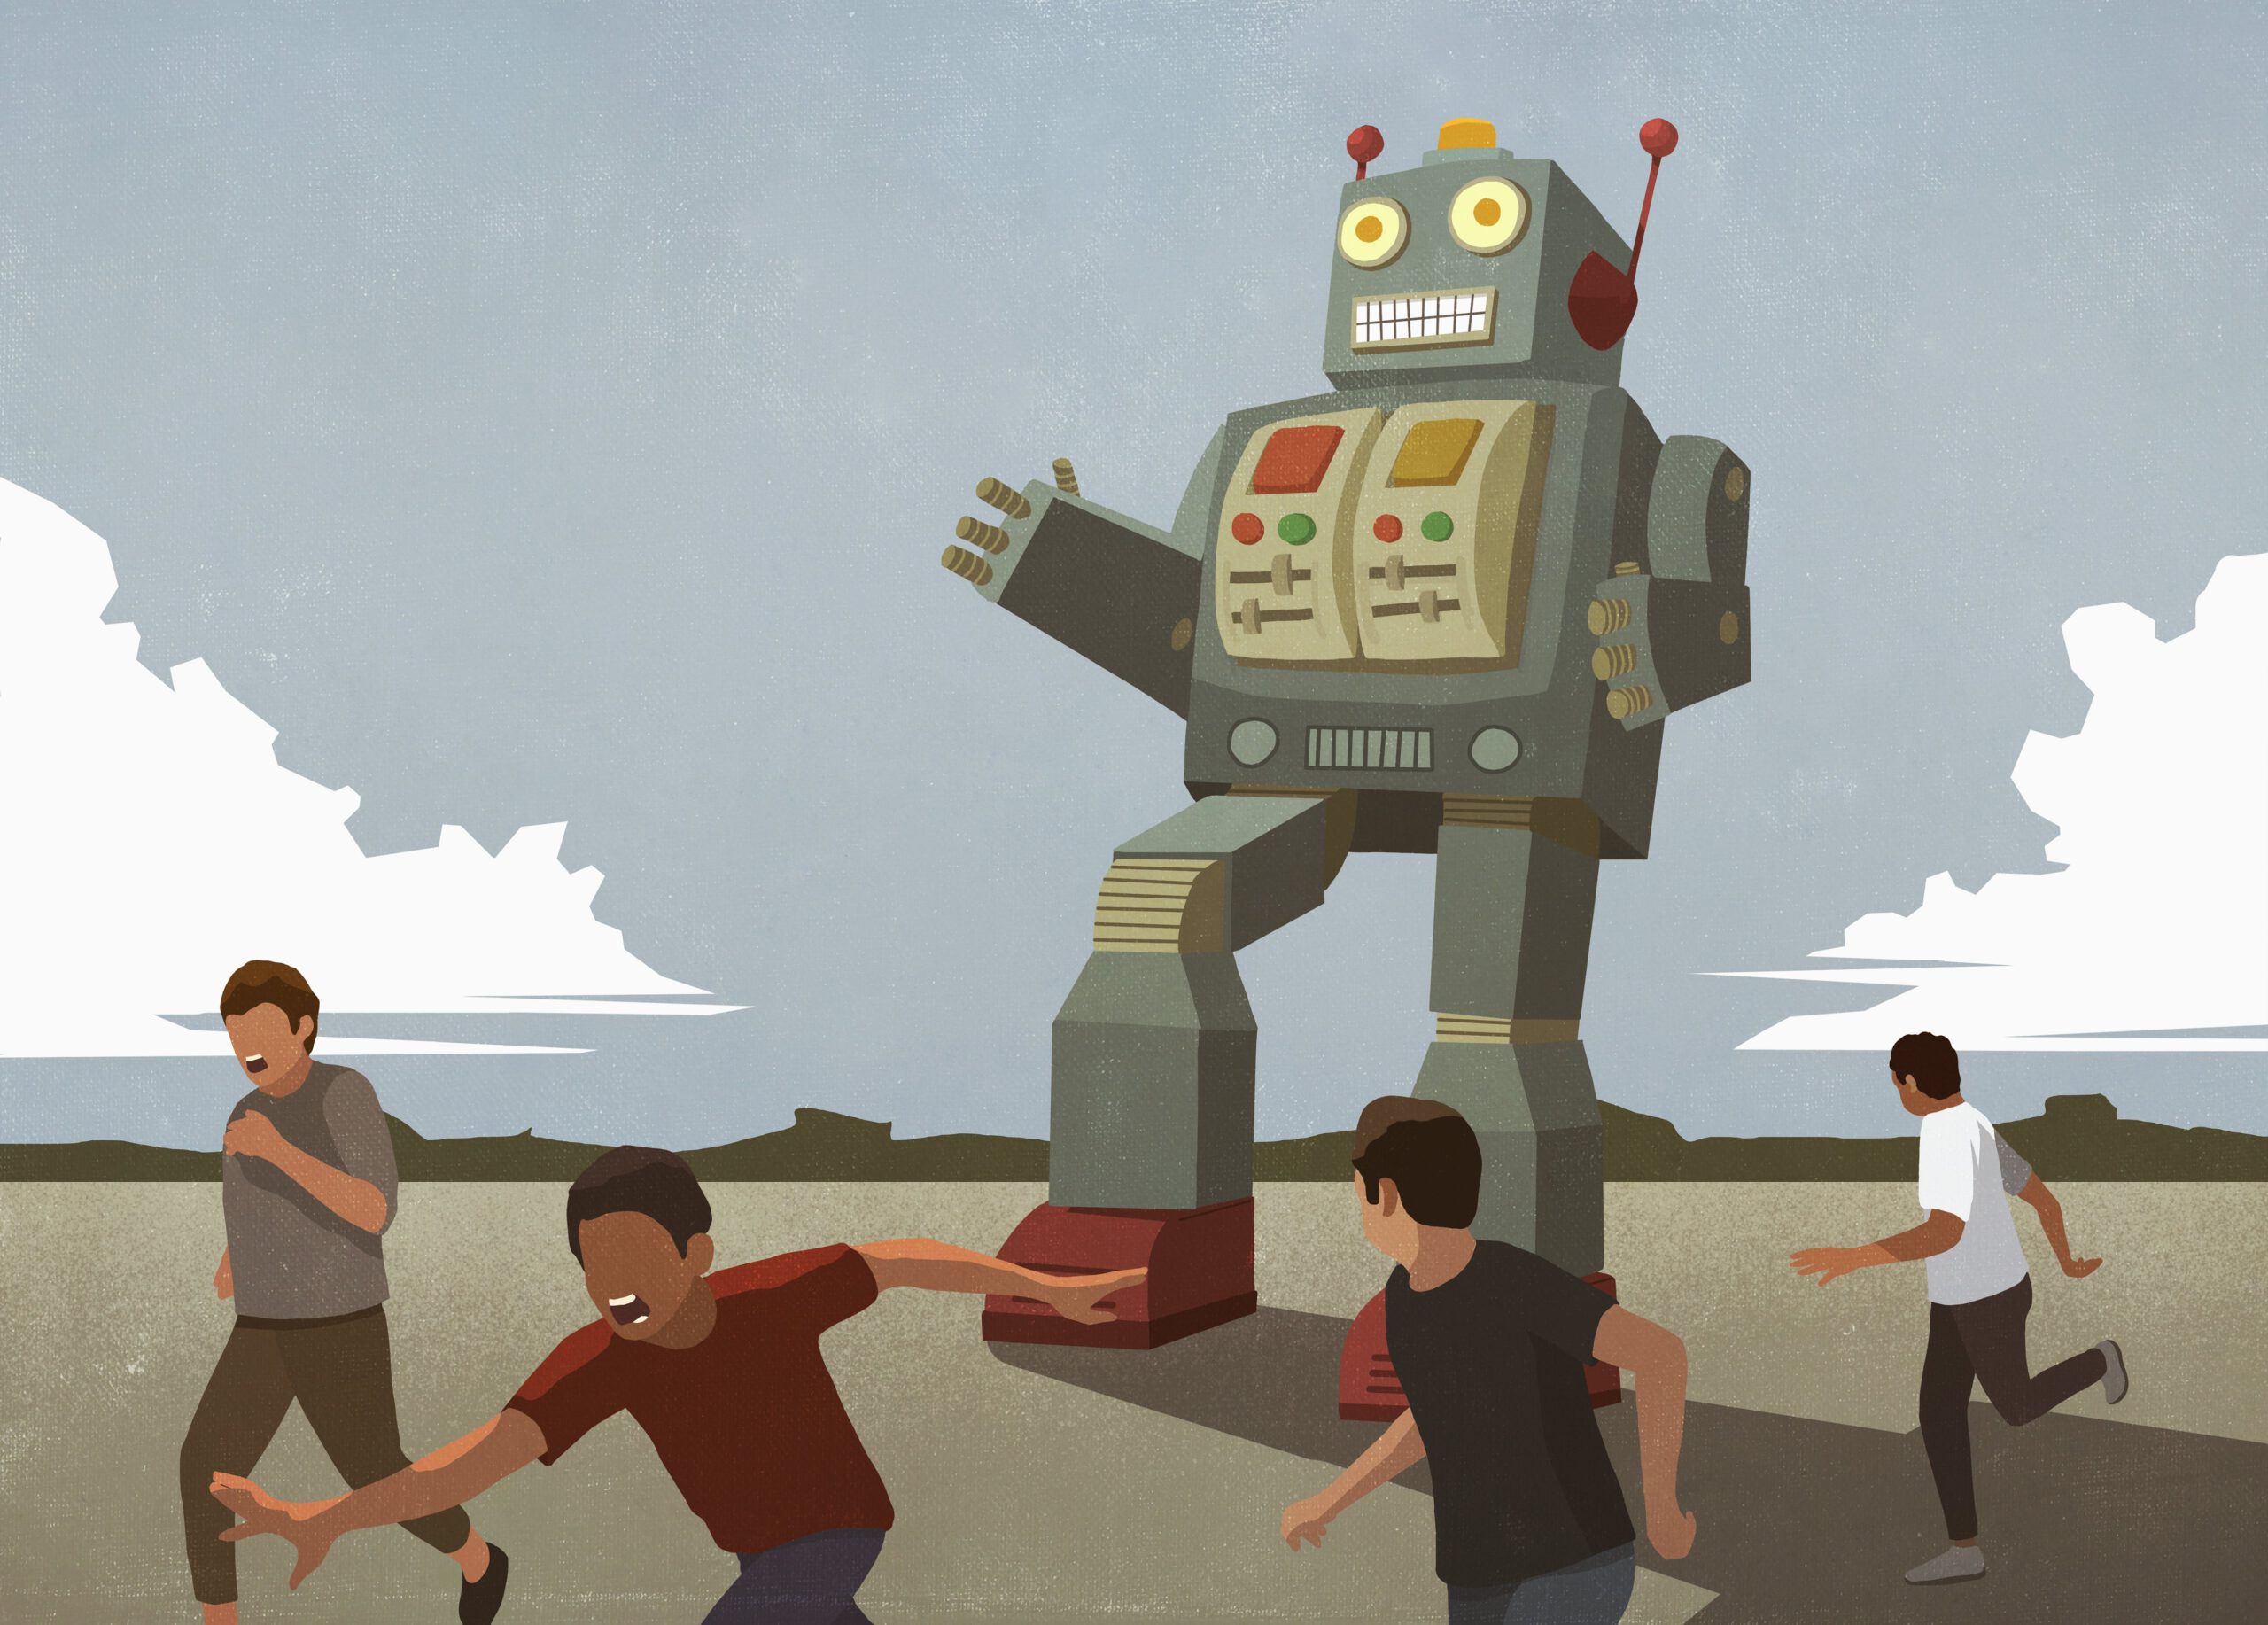 a giant toy robot chases some boys